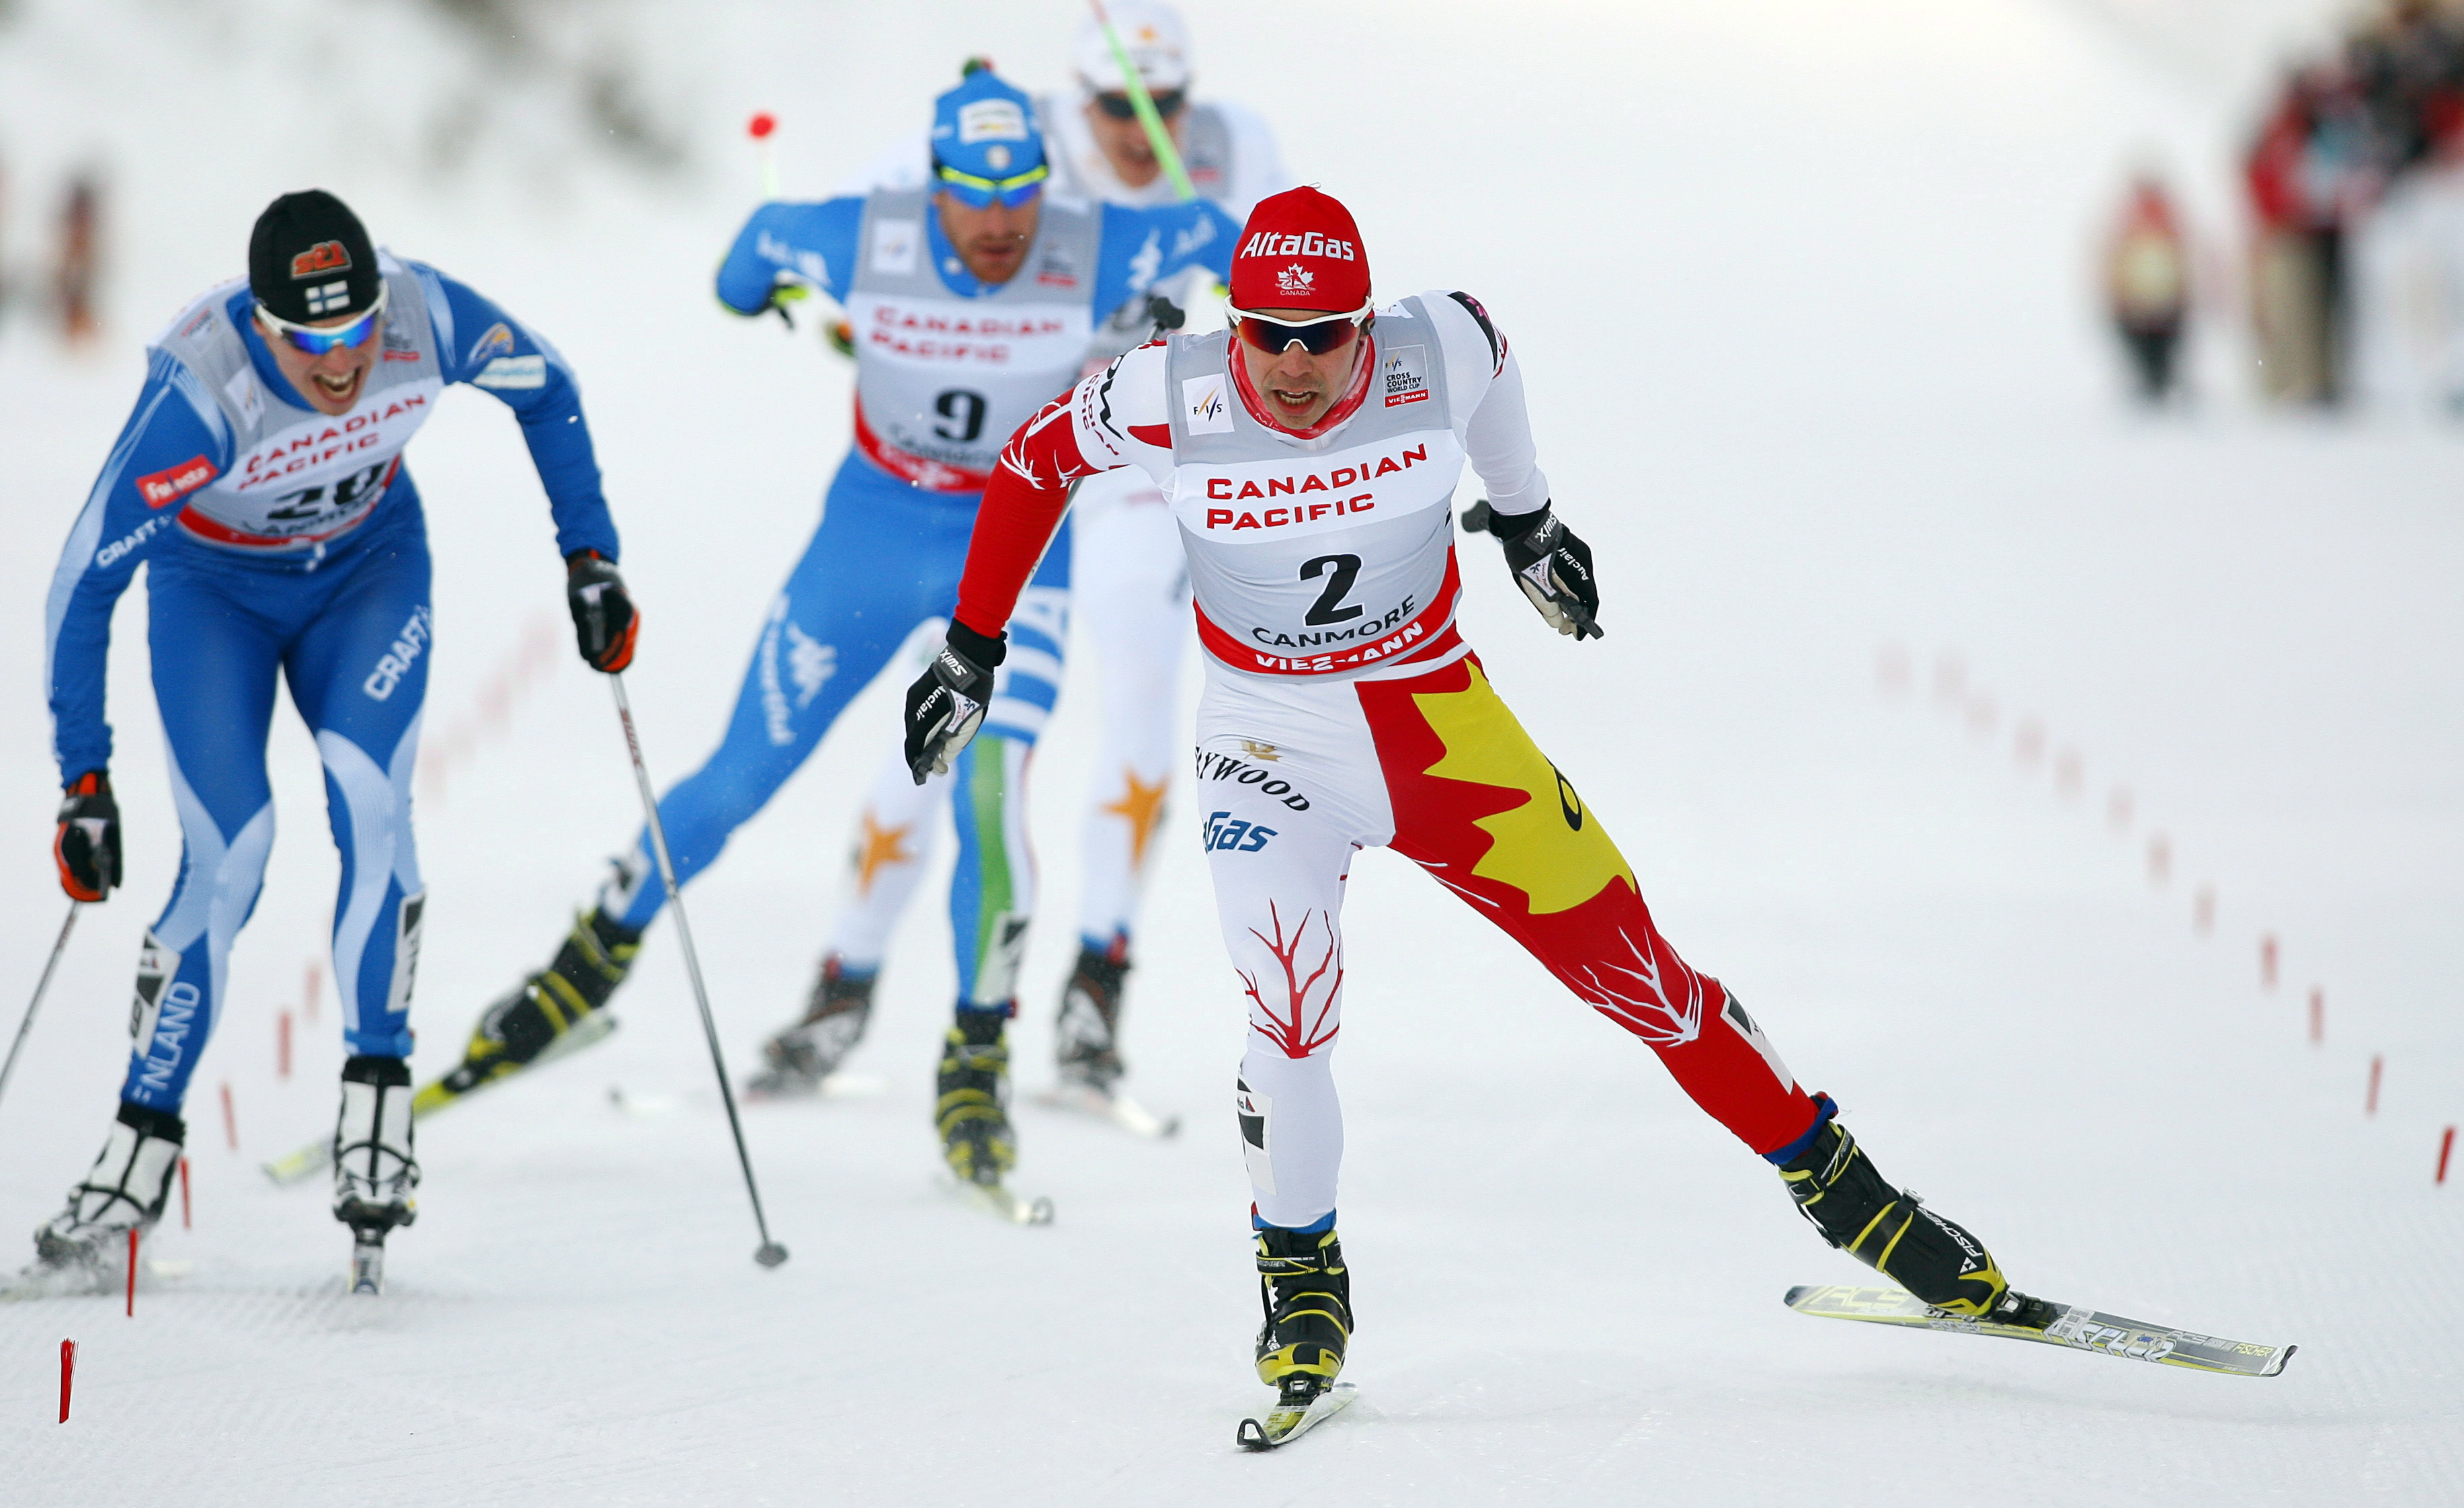 Jesse Cockney skiing with competitors trailing behind him